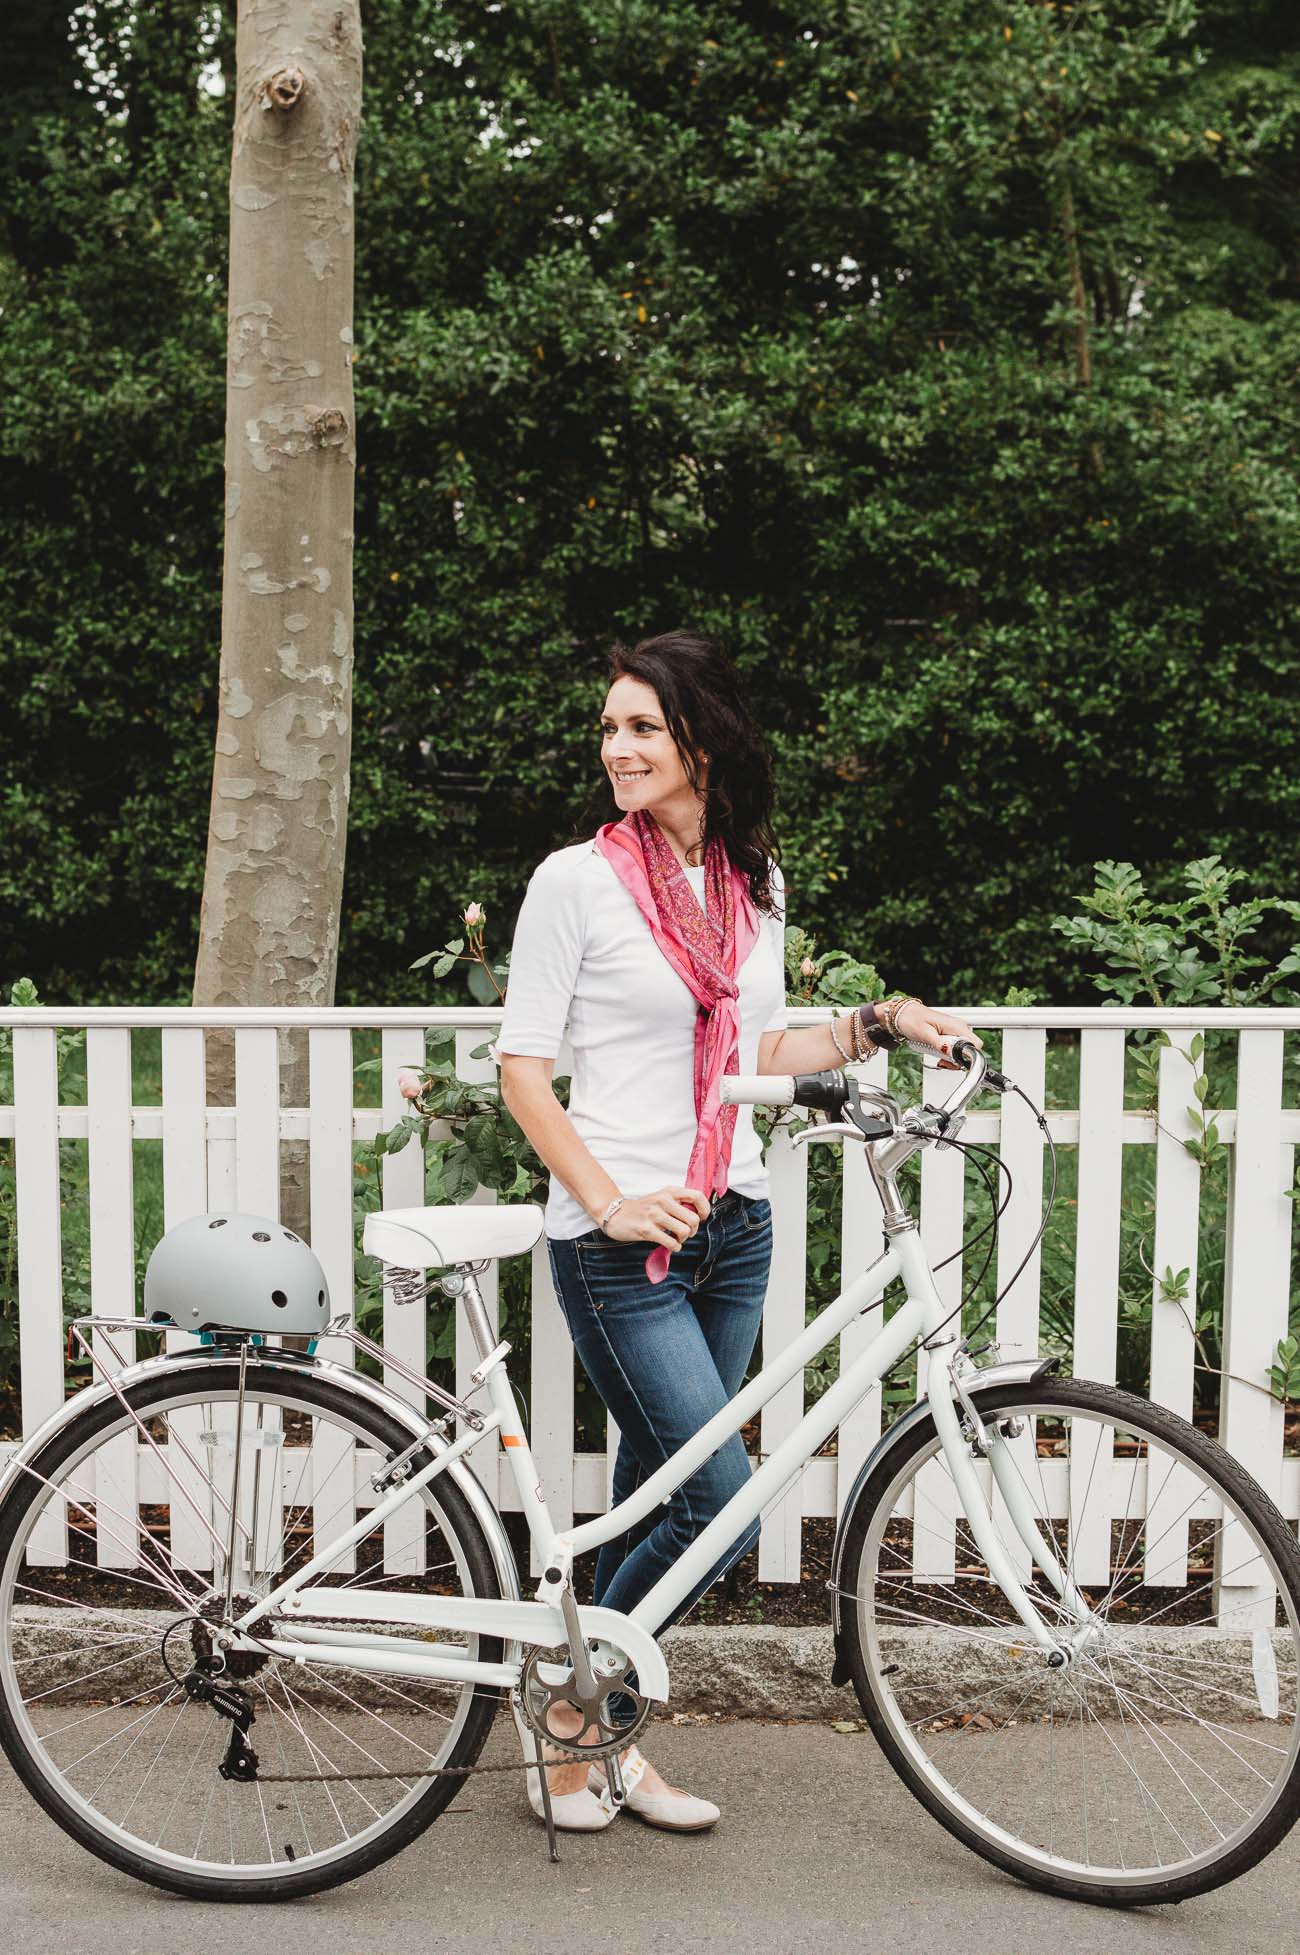 Places to Bike on Nantucket - Pt 2 | Nicole Victory Design